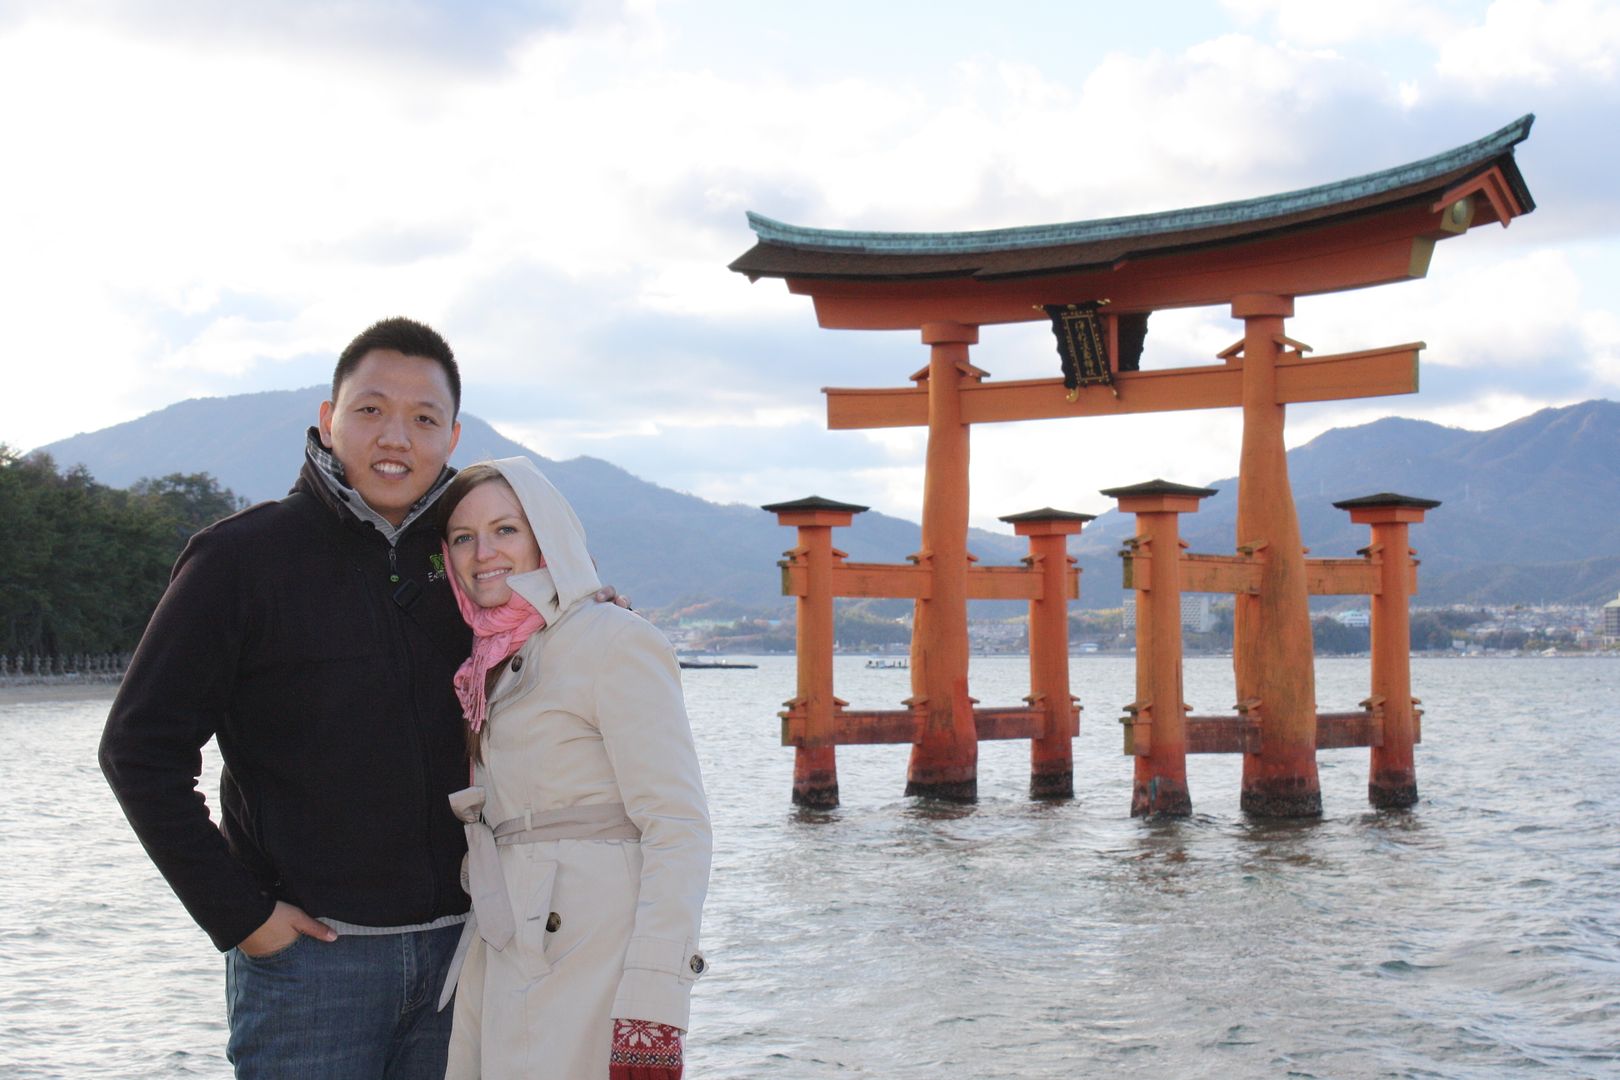 Michael and Michelle at Itsukushima Shrine in Japan photo 2013-12-23231935_zps8069d5d4.jpg